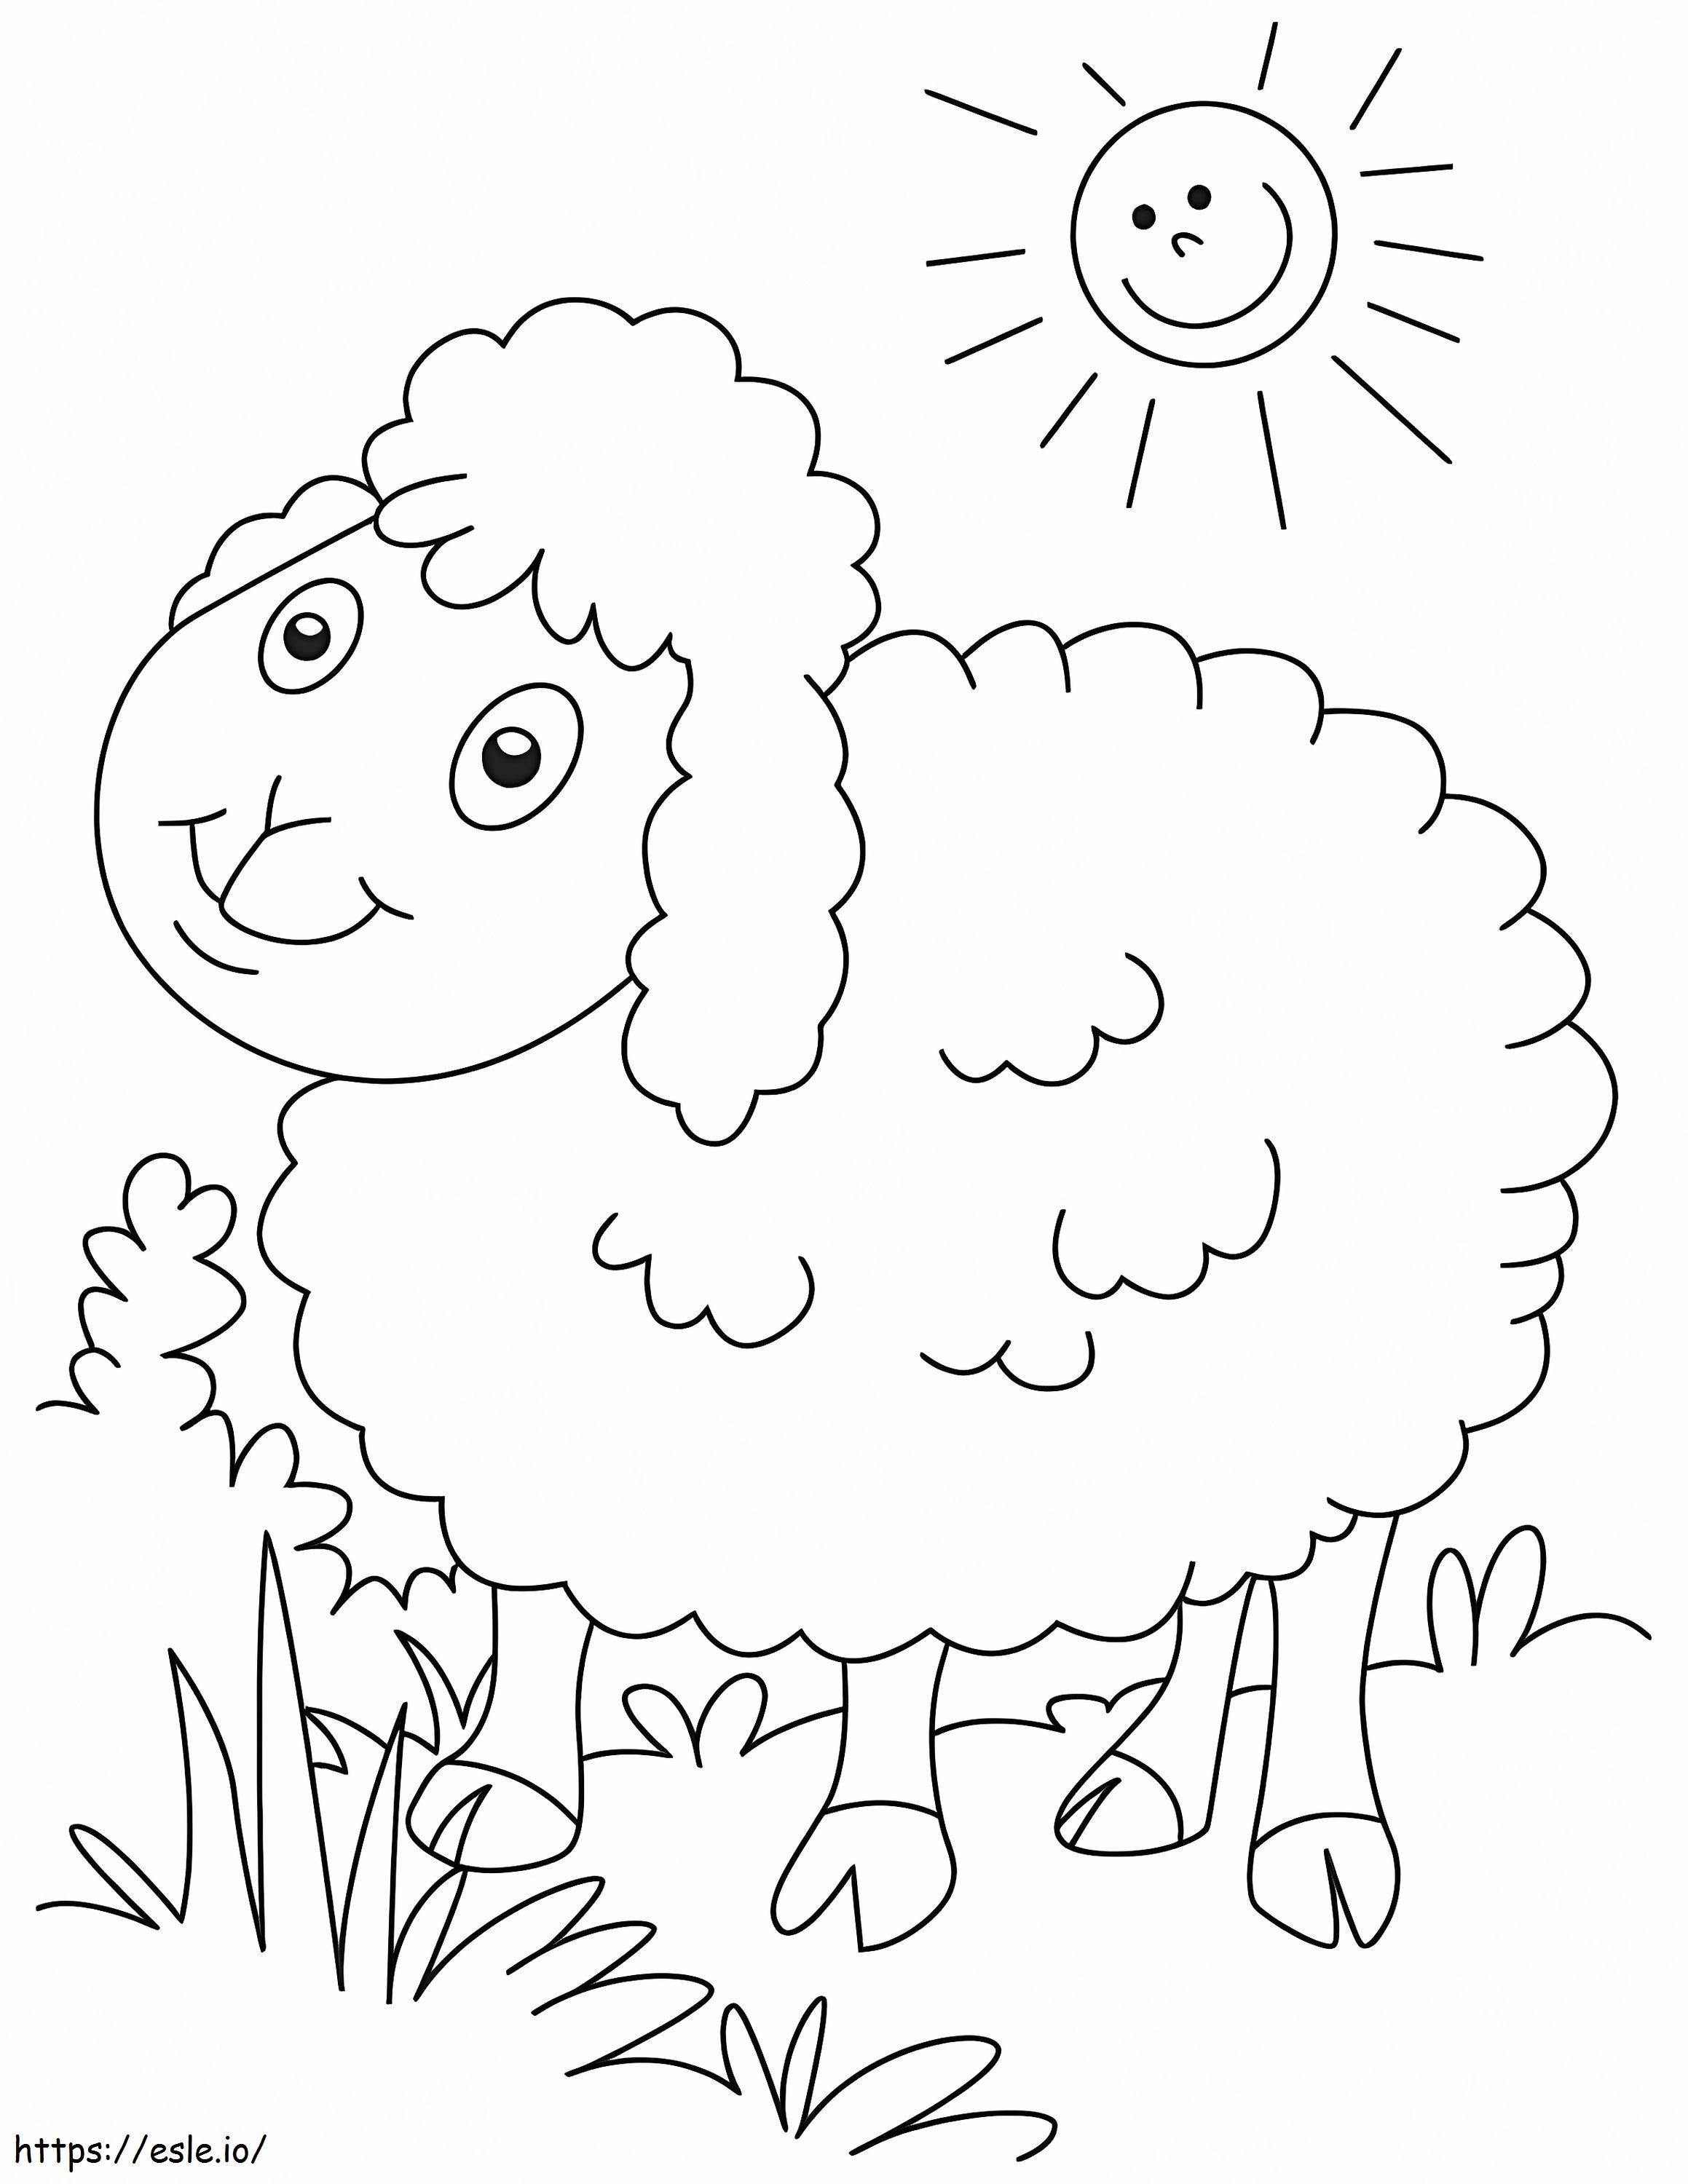 Sheep Basking In The Sun coloring page